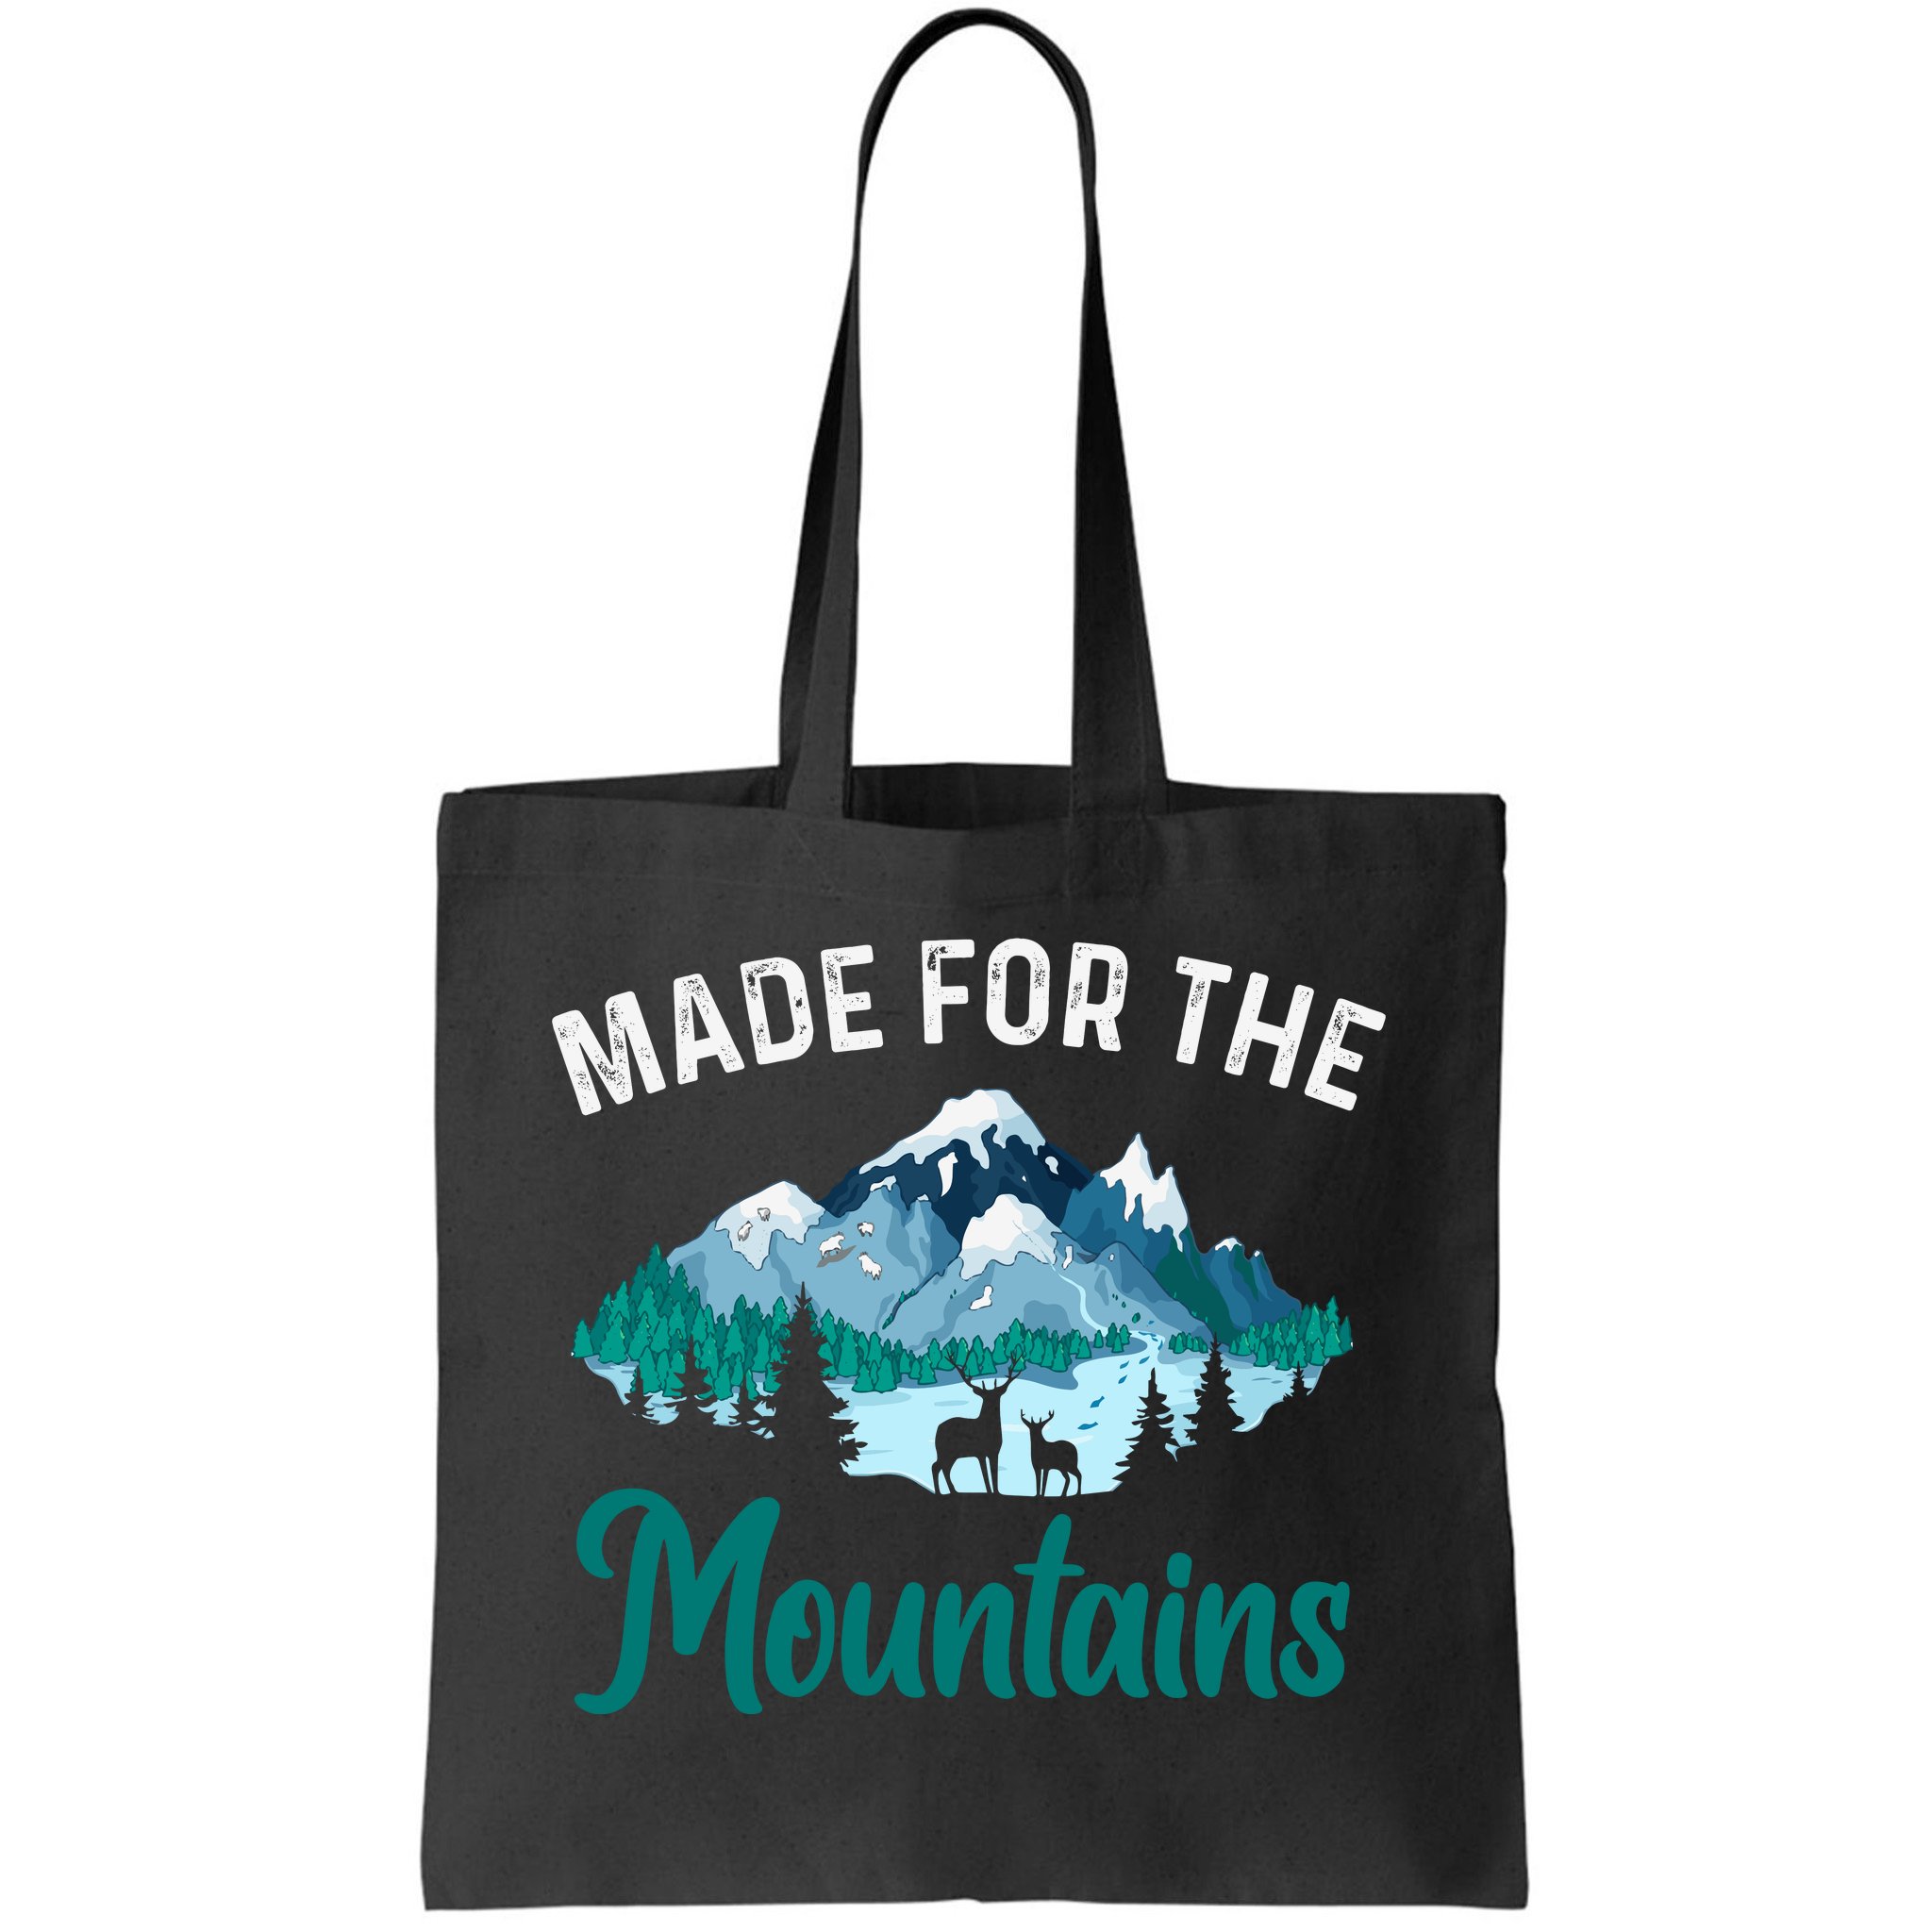 https://images3.teeshirtpalace.com/images/productImages/mft9264917-made-for-the-mountains-camping--black-ltb-garment.jpg